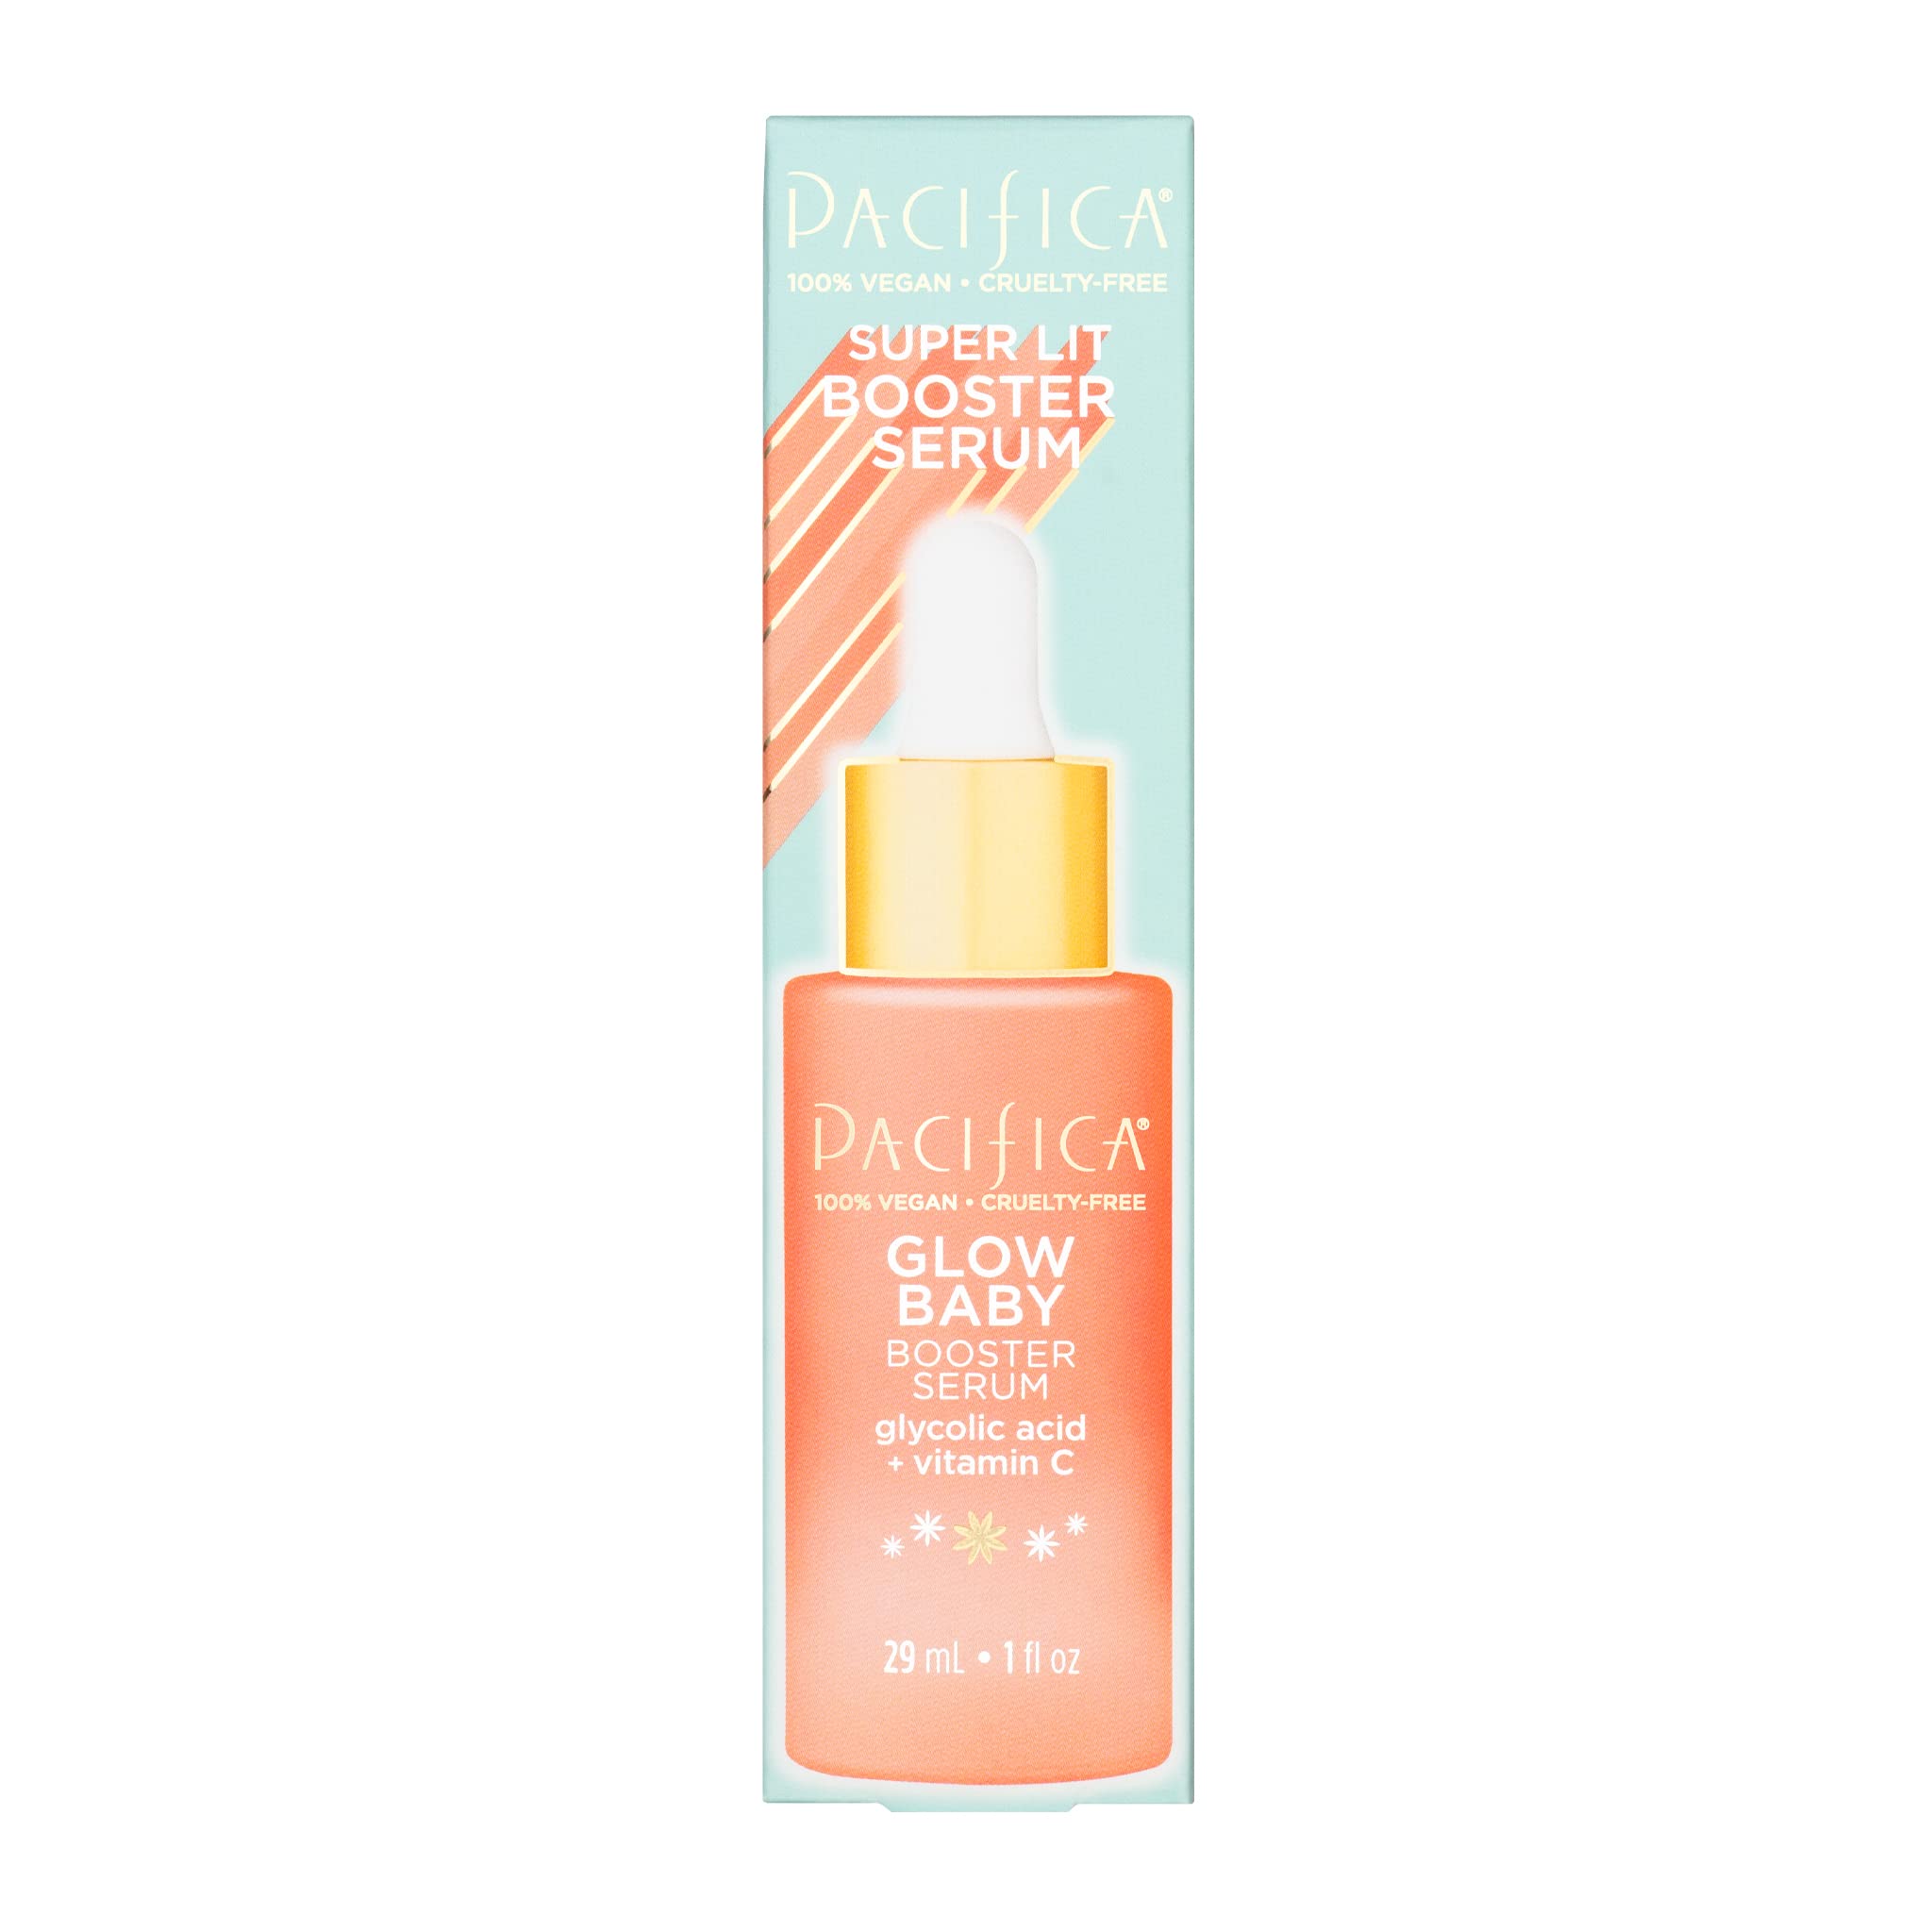 Pacifica Beauty, Glow Baby Booster Serum For Face, Vitamin C and Glycolic acid, Brightens and Supports, For All Skin Types, Fragrance Free, Clean Skin Care, Vegan and Cruelty Free , 1 Fl oz